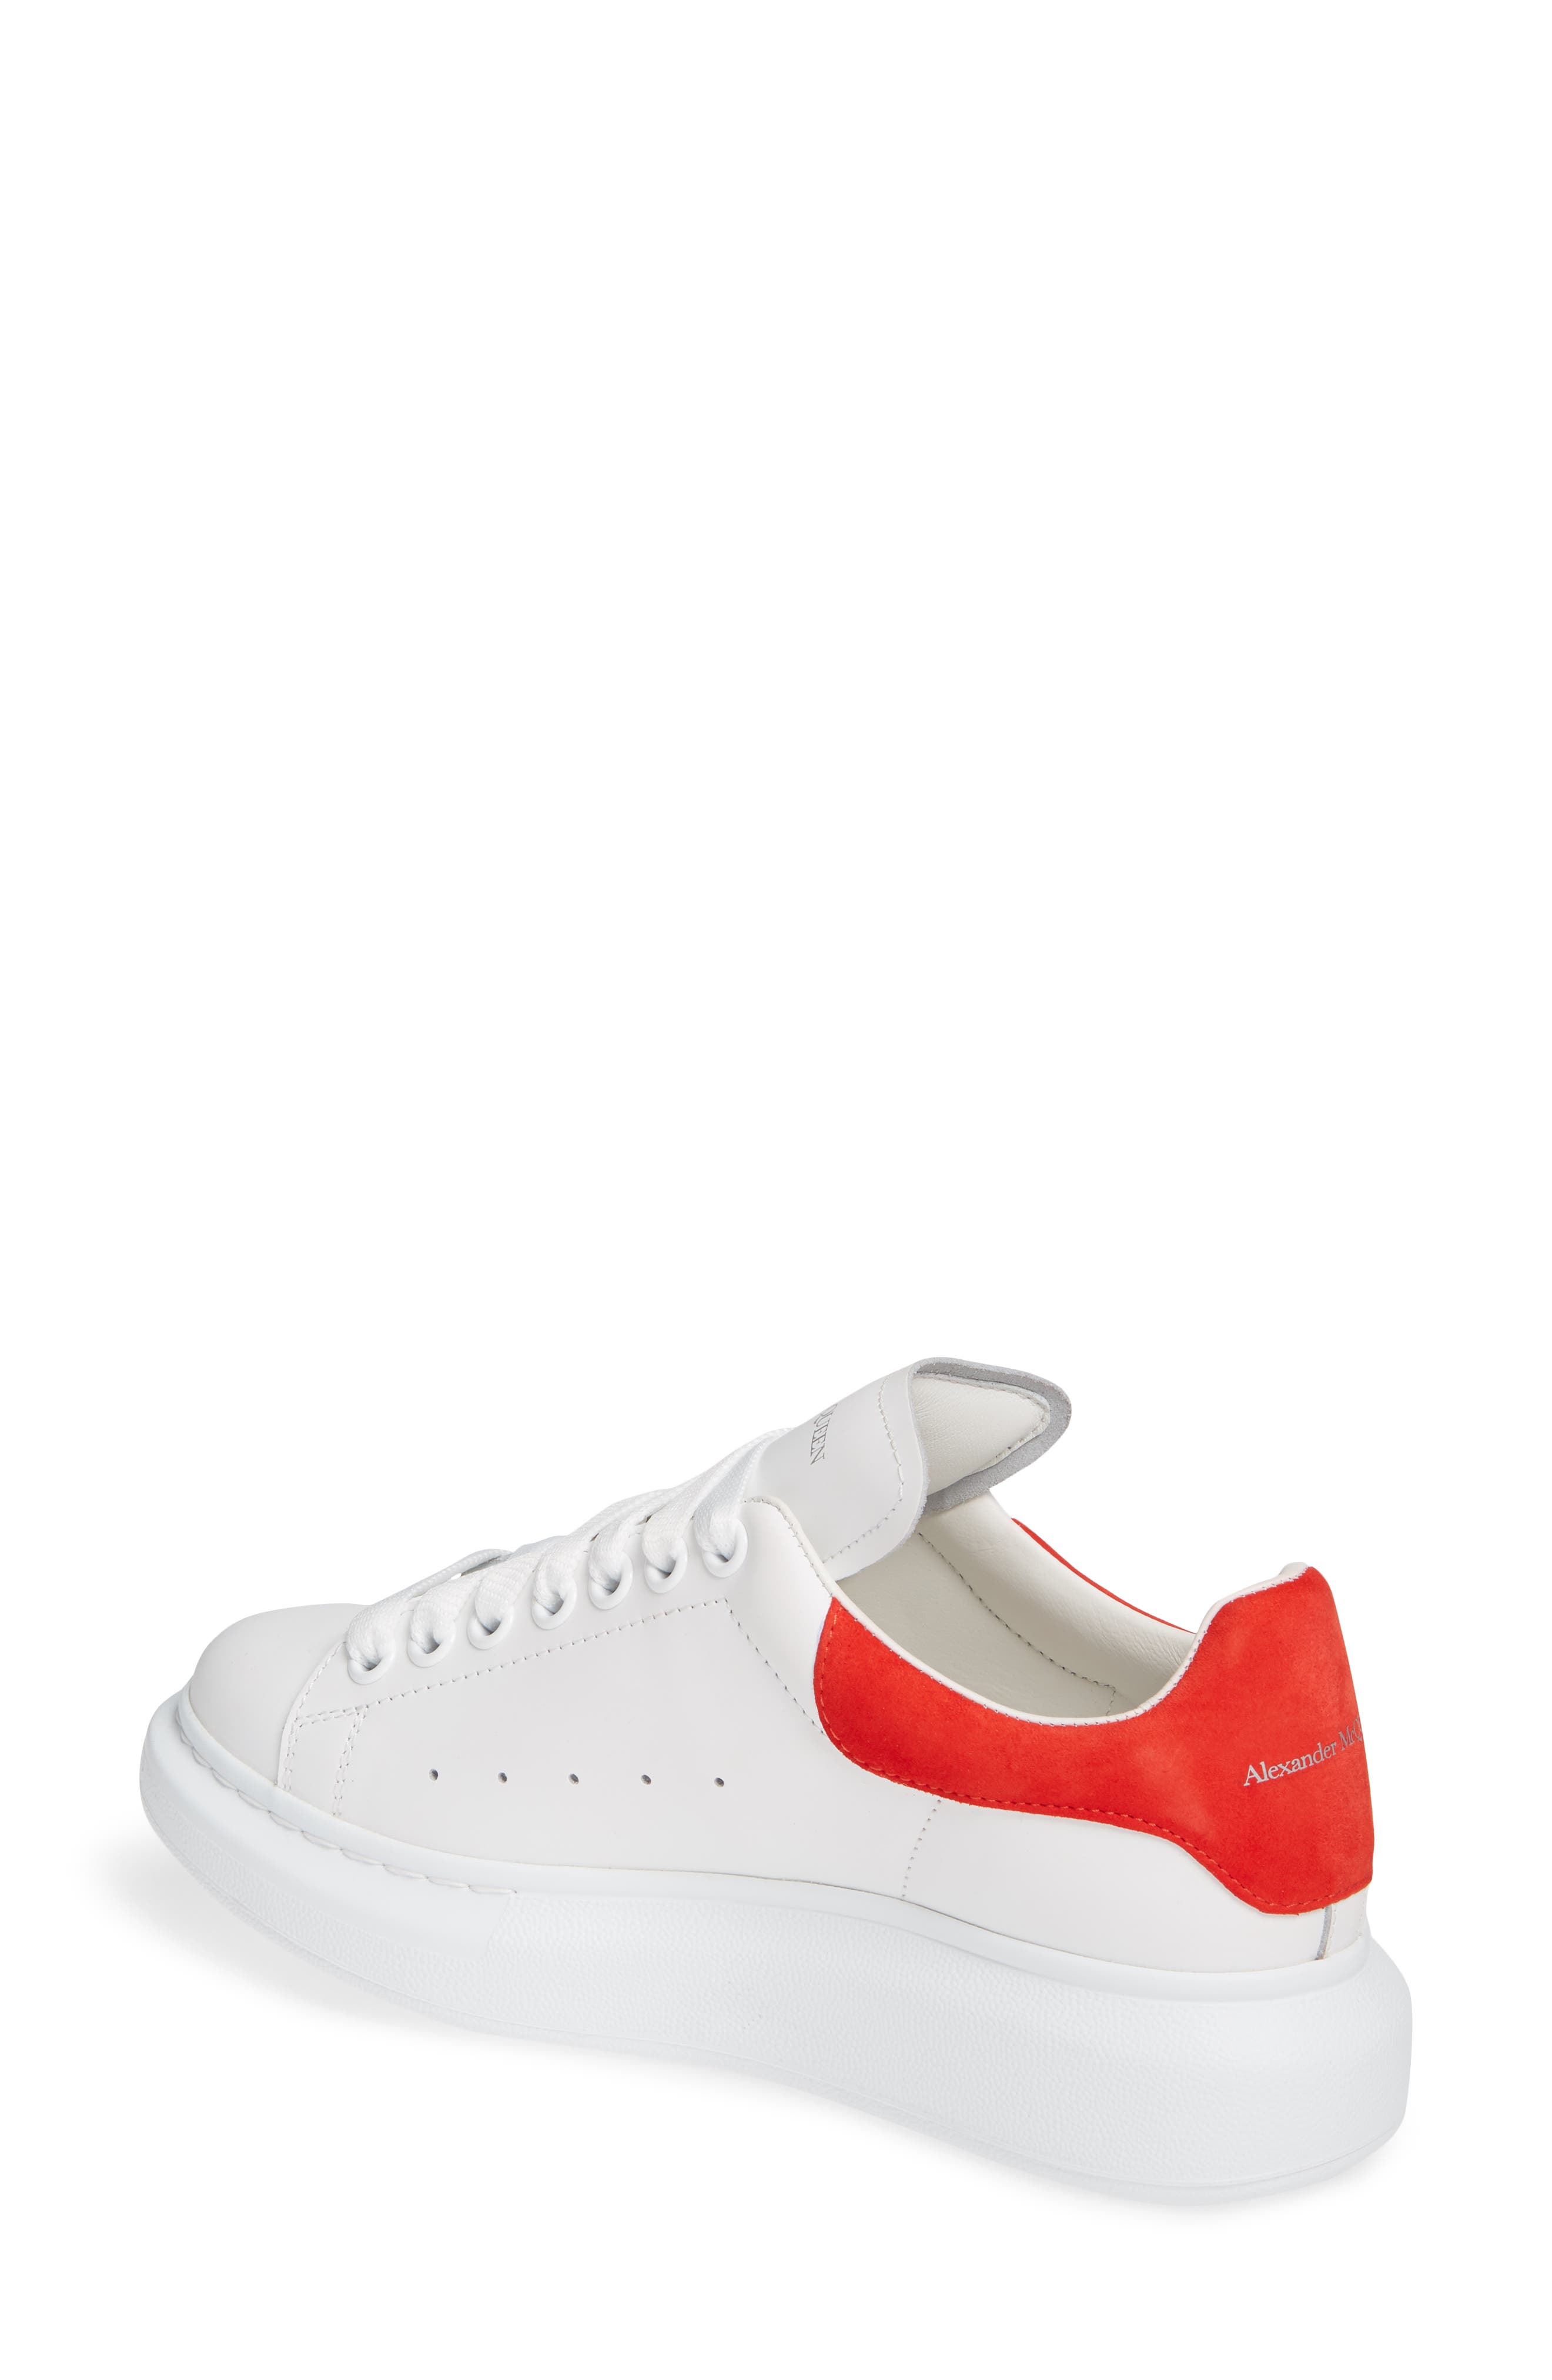 red and white alexander mcqueen sneakers